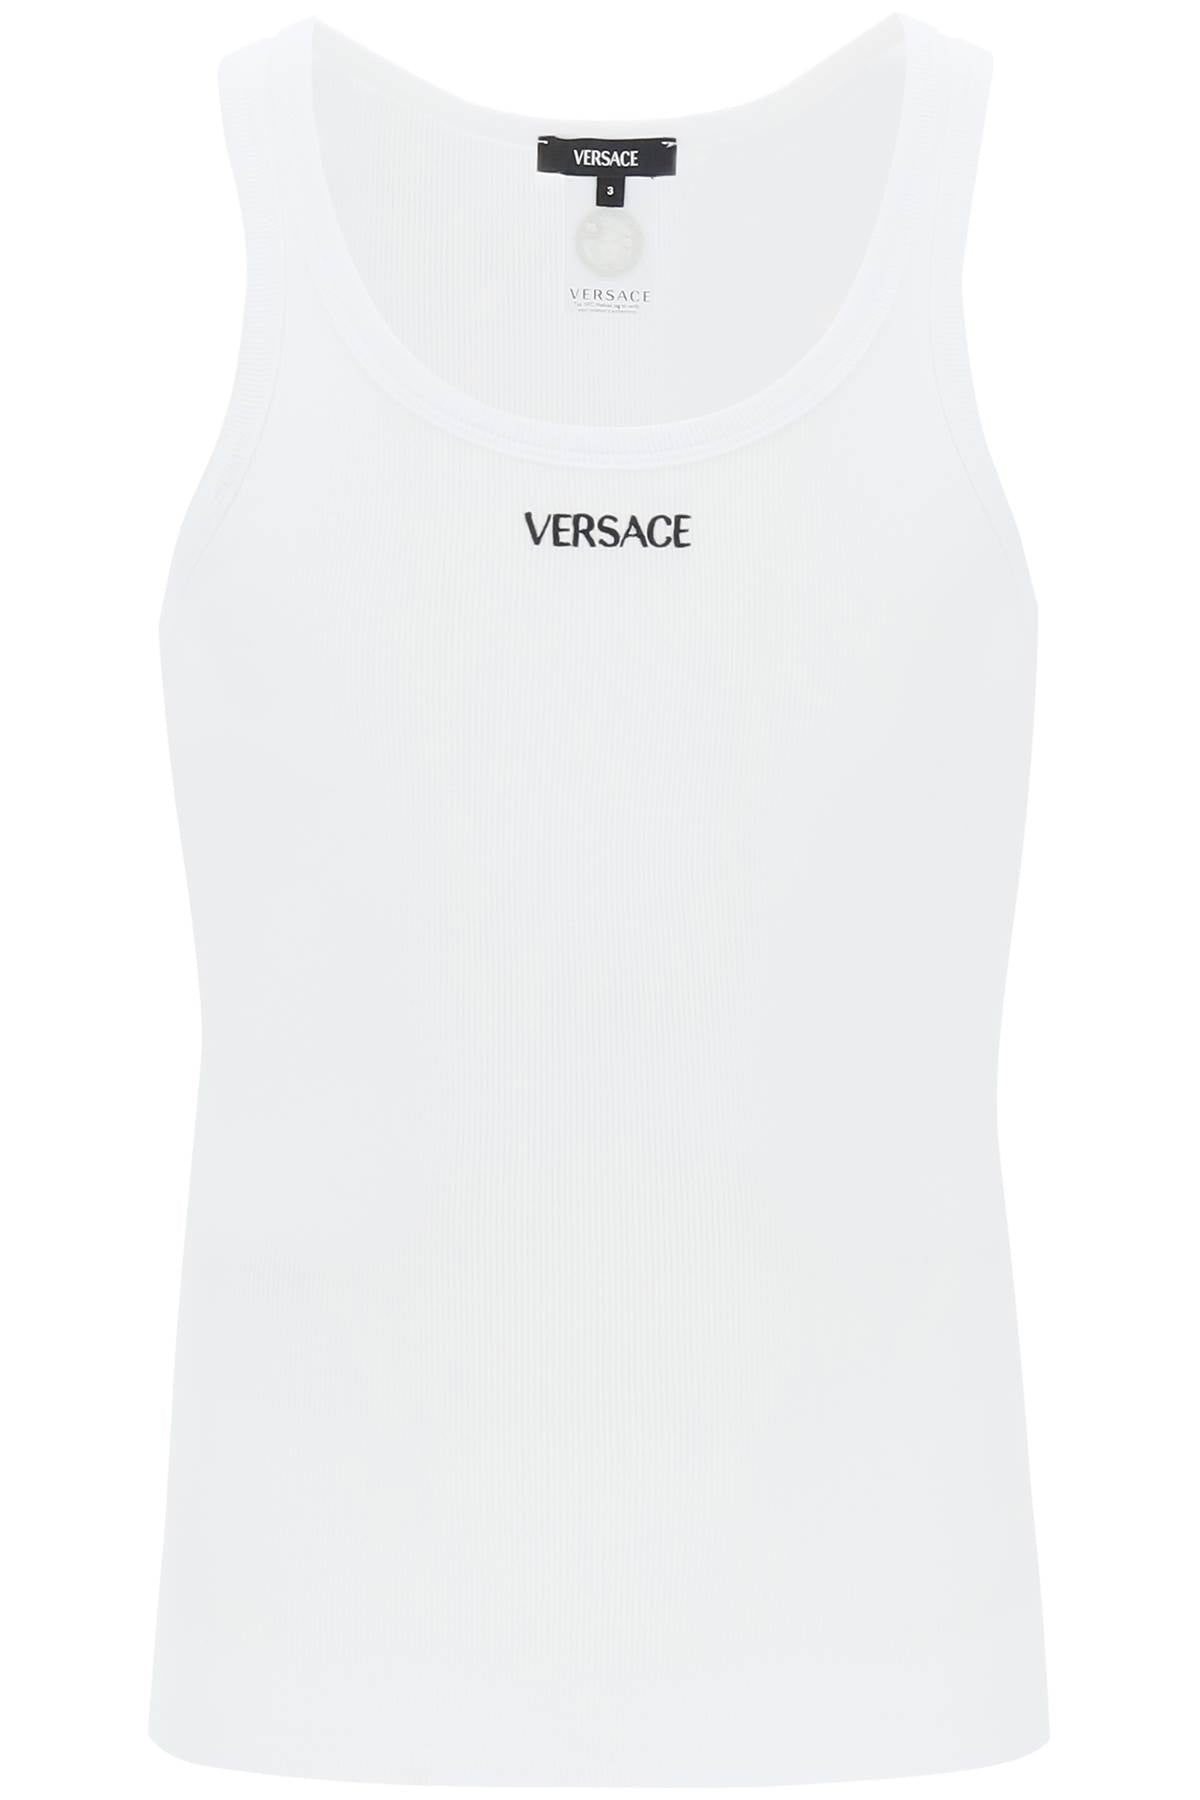 "intimate tank top with embroidered 1013125 1A09410 OPTICAL WHITE